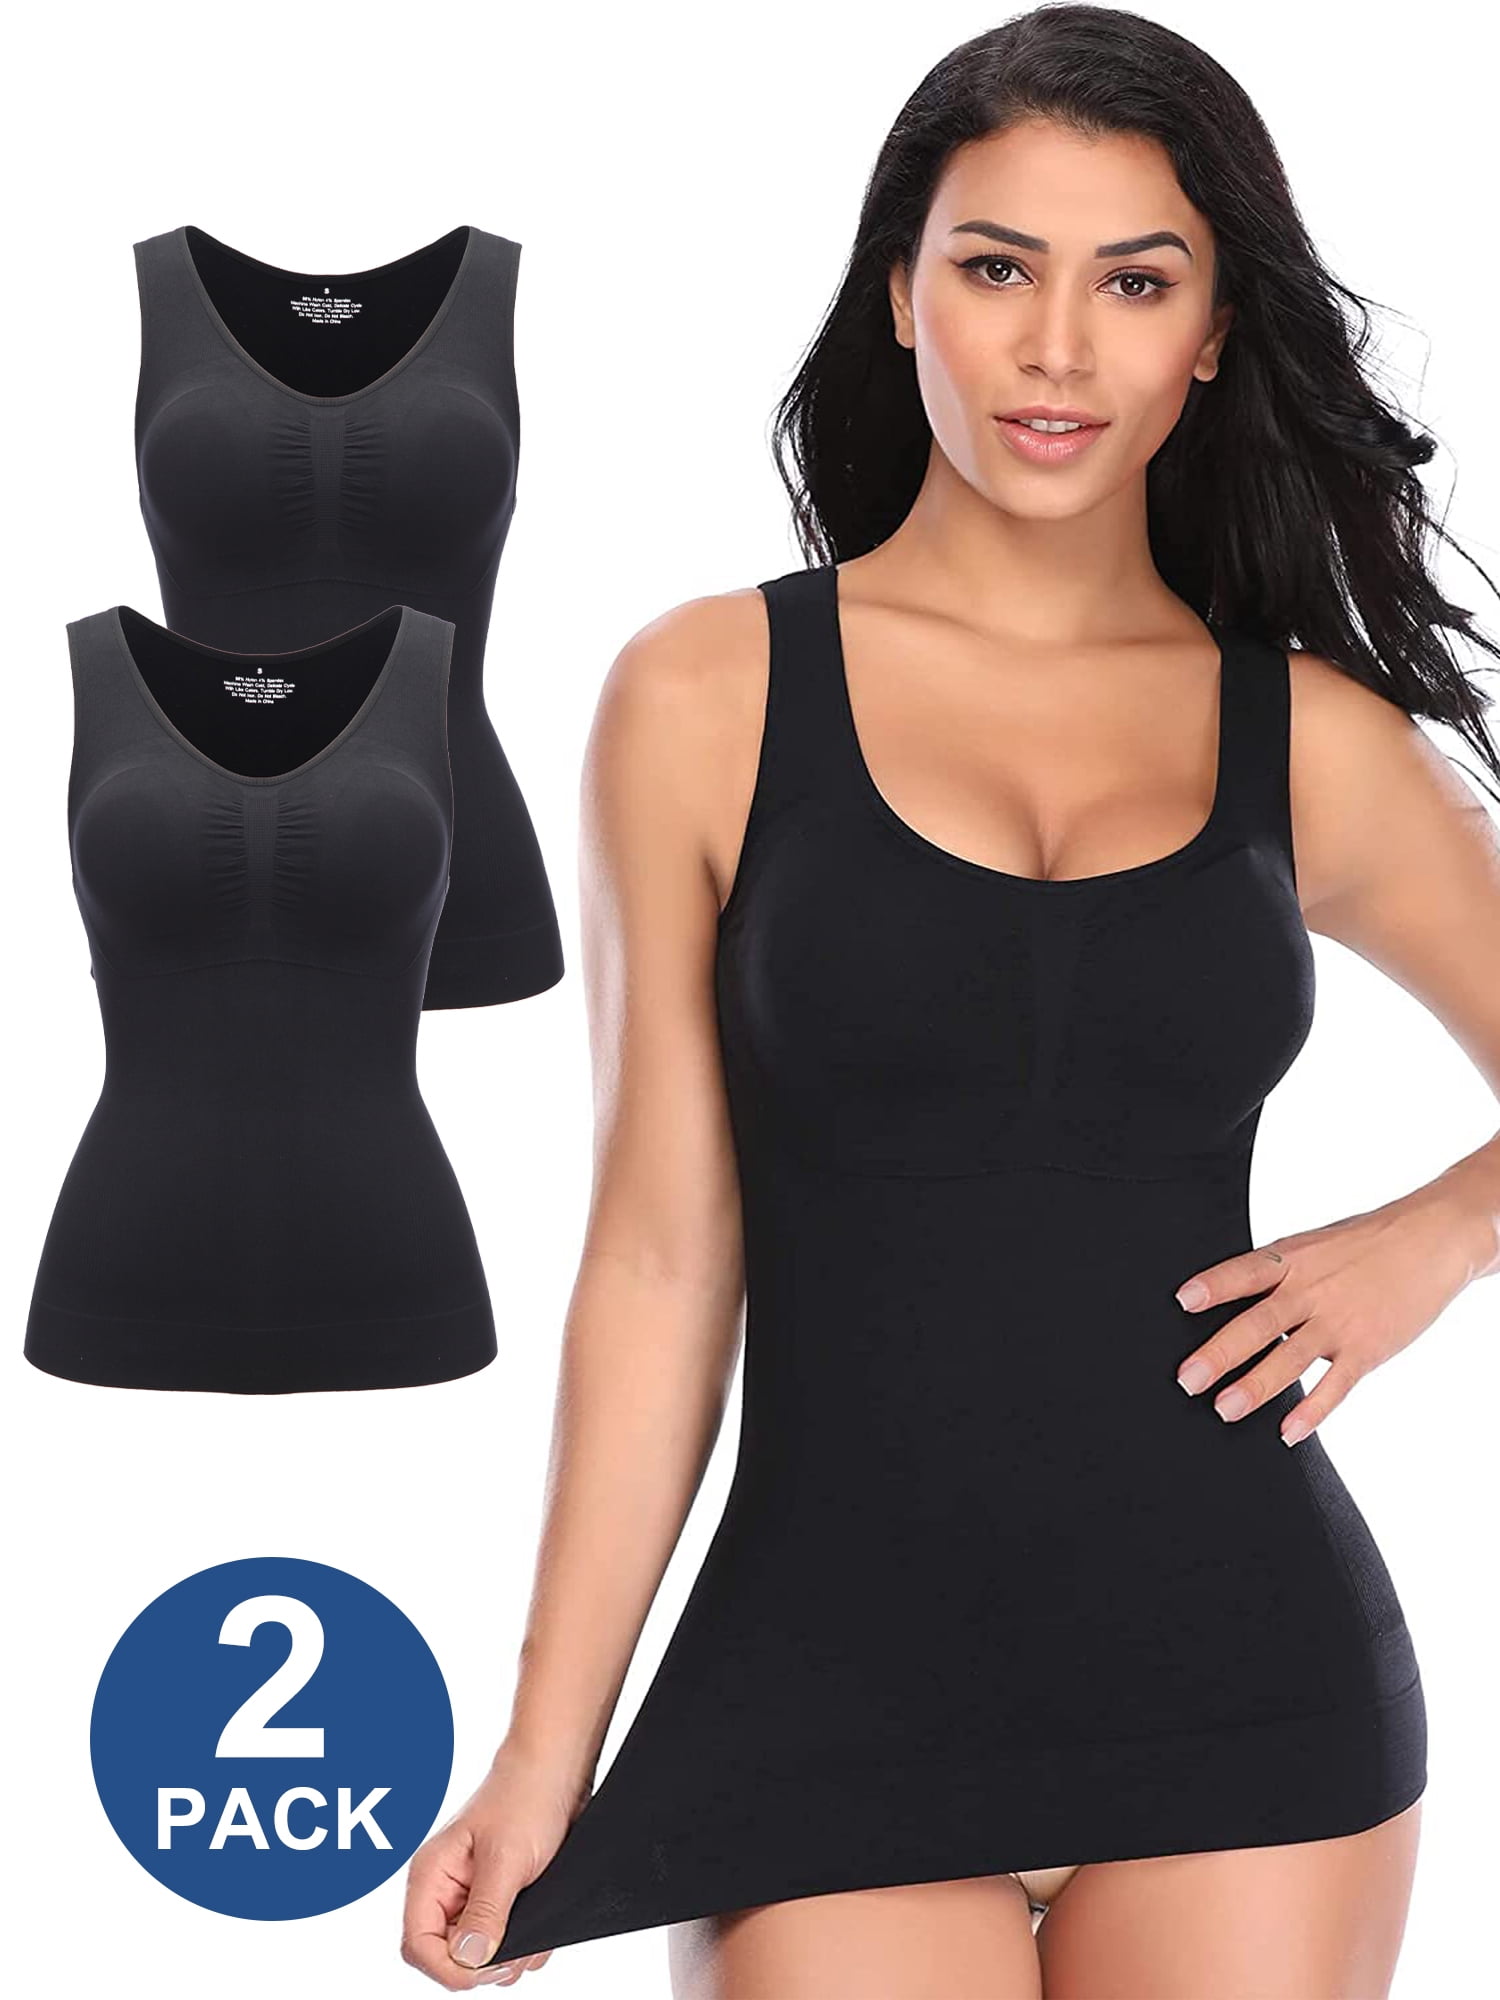 QRIC 3 Pack Tummy Control Camisole for Women Shapewear Tank Tops with Built  in Bra Slimming Compression Top Vest Seamless Body Shaper 